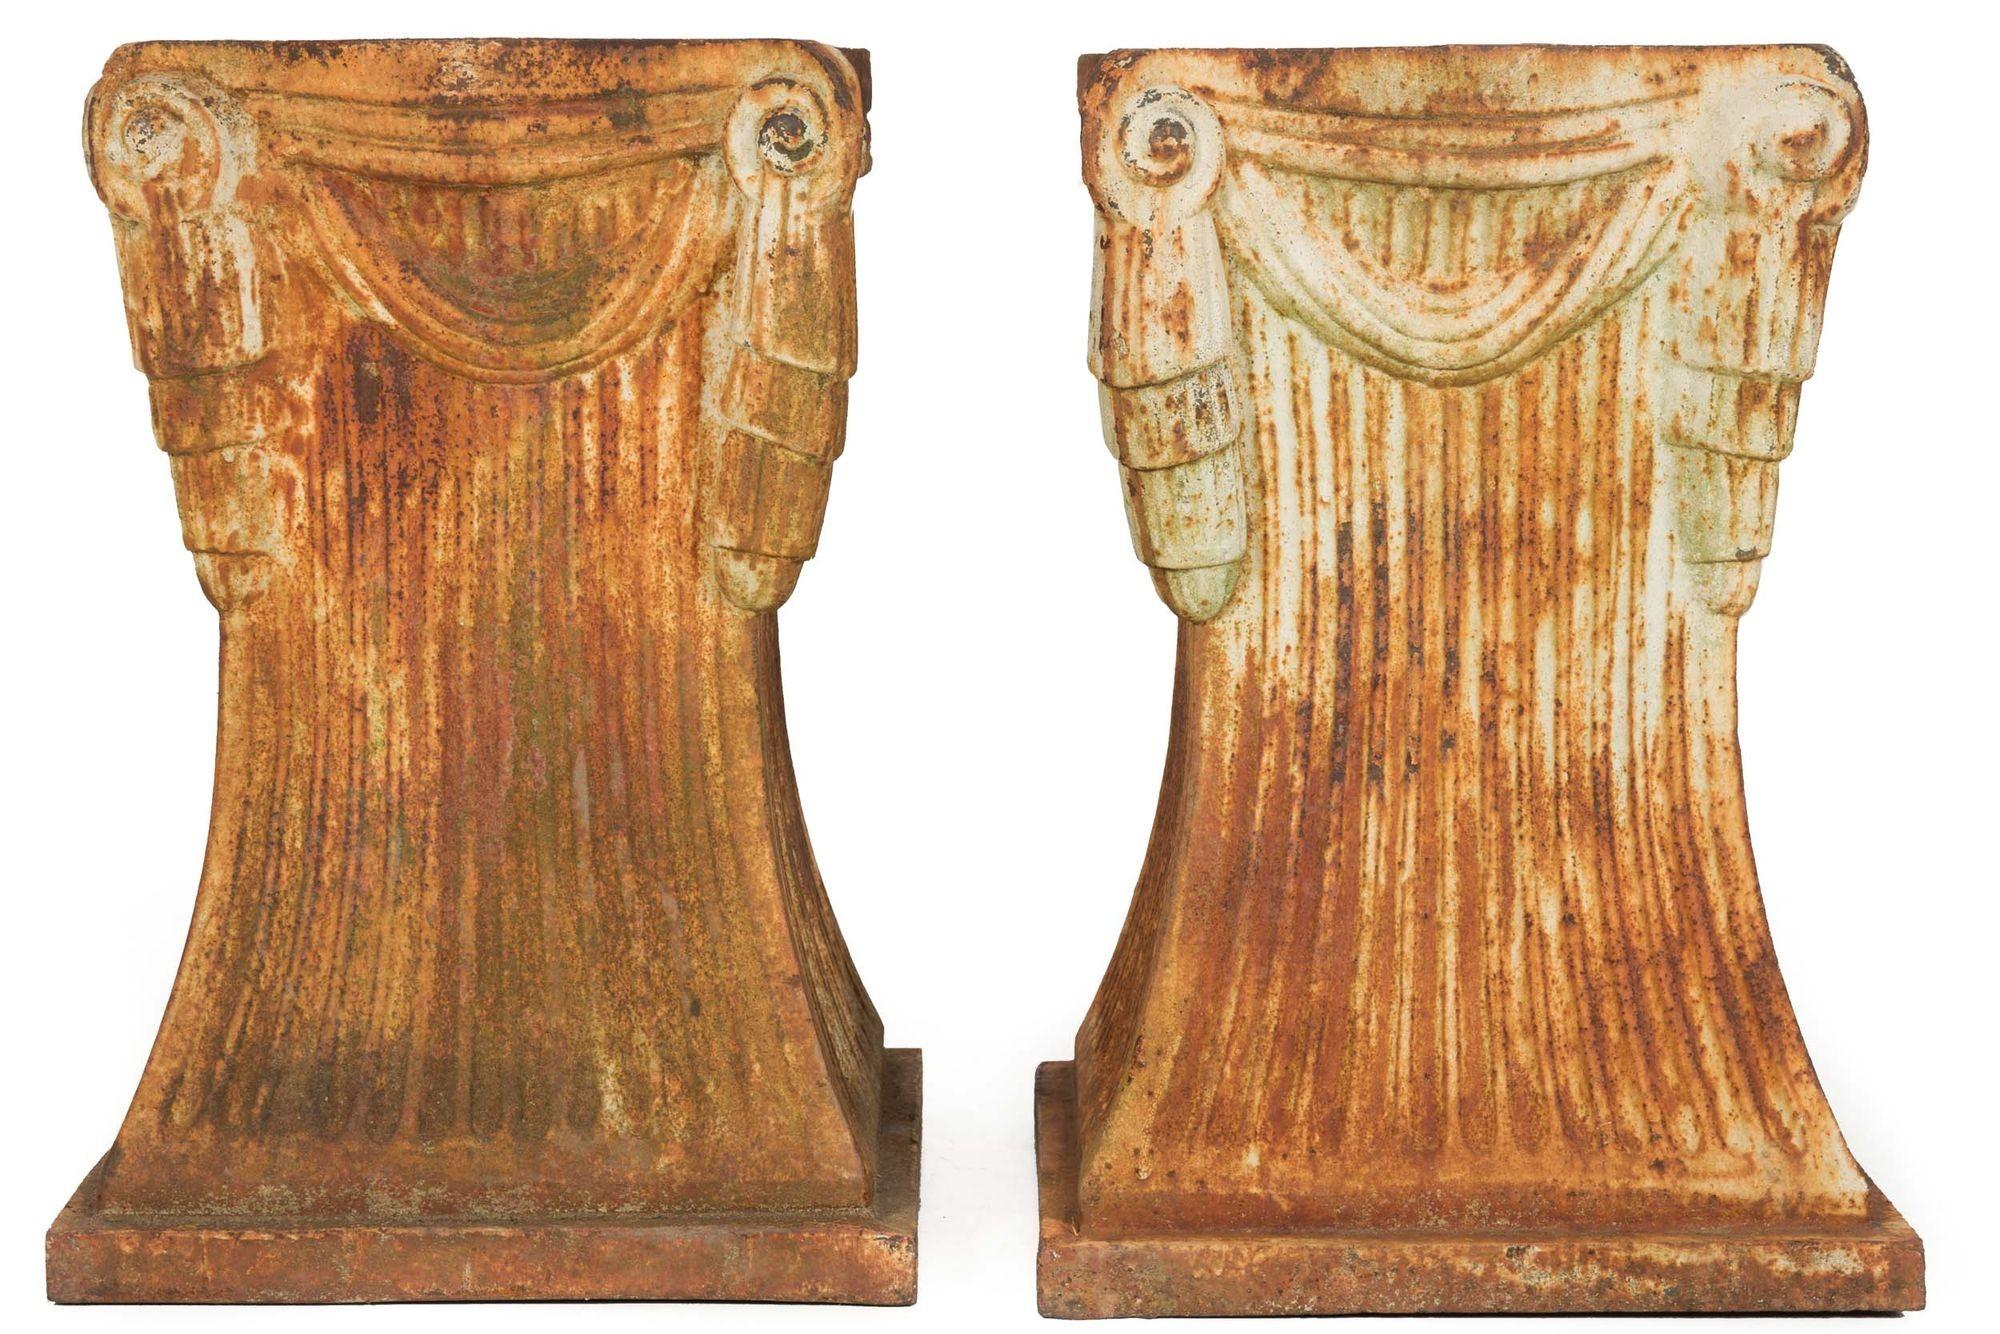 Unusual Pair of Art Deco Cast-Iron Garden Pedestals for Statuary or Planters For Sale 1